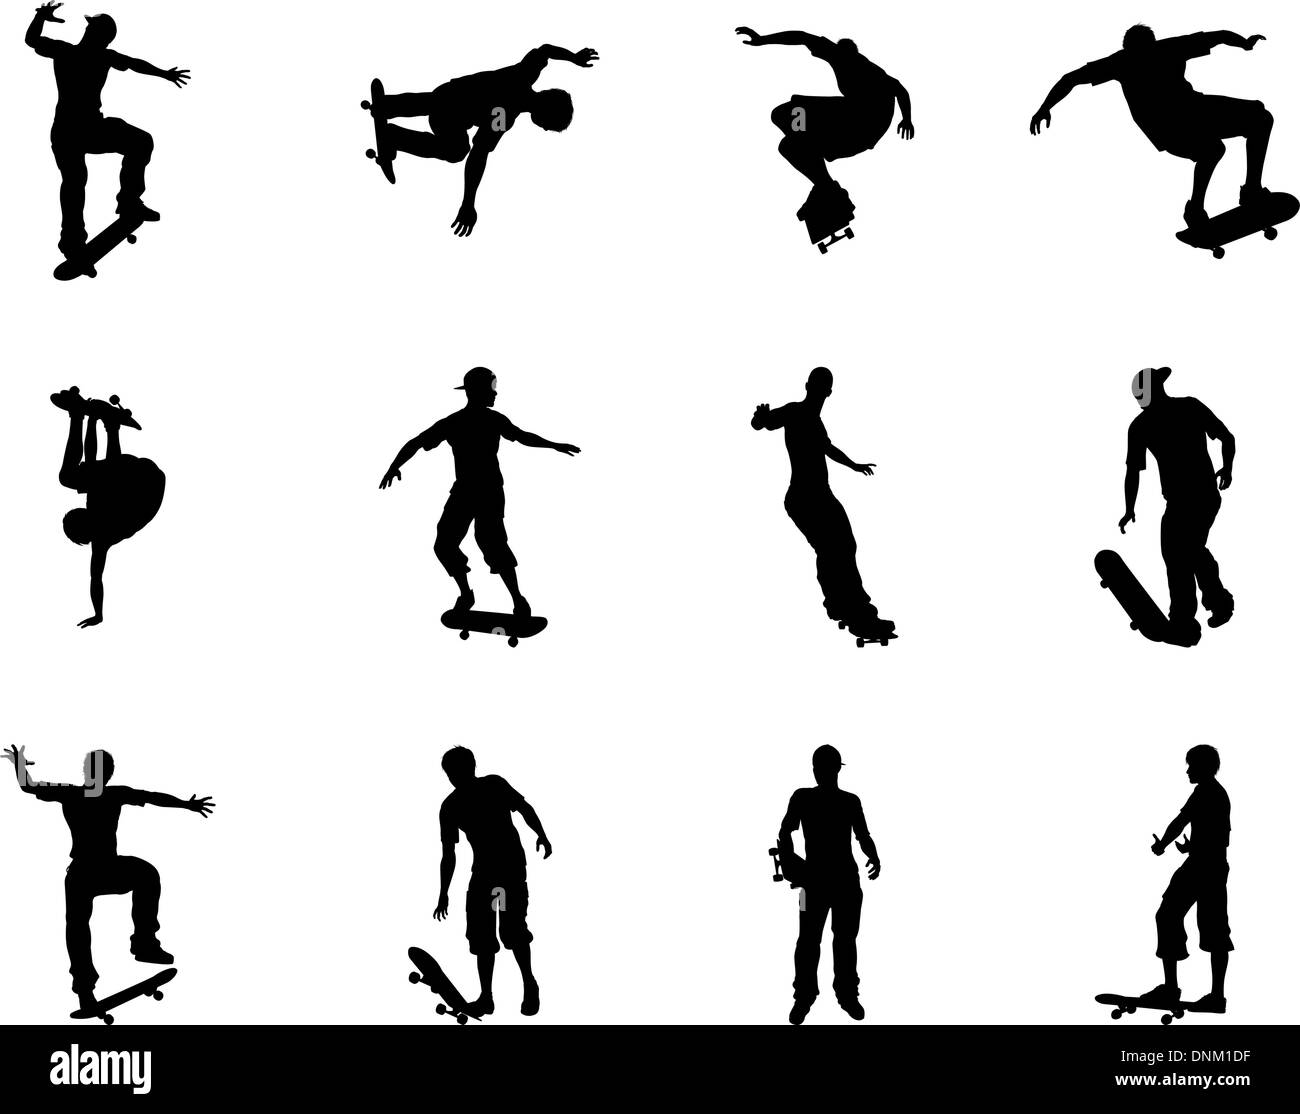 Very high quality and highly detailed skating skateboarder silhouette outlines. Skateboarders performing lots of tricks on their Stock Vector